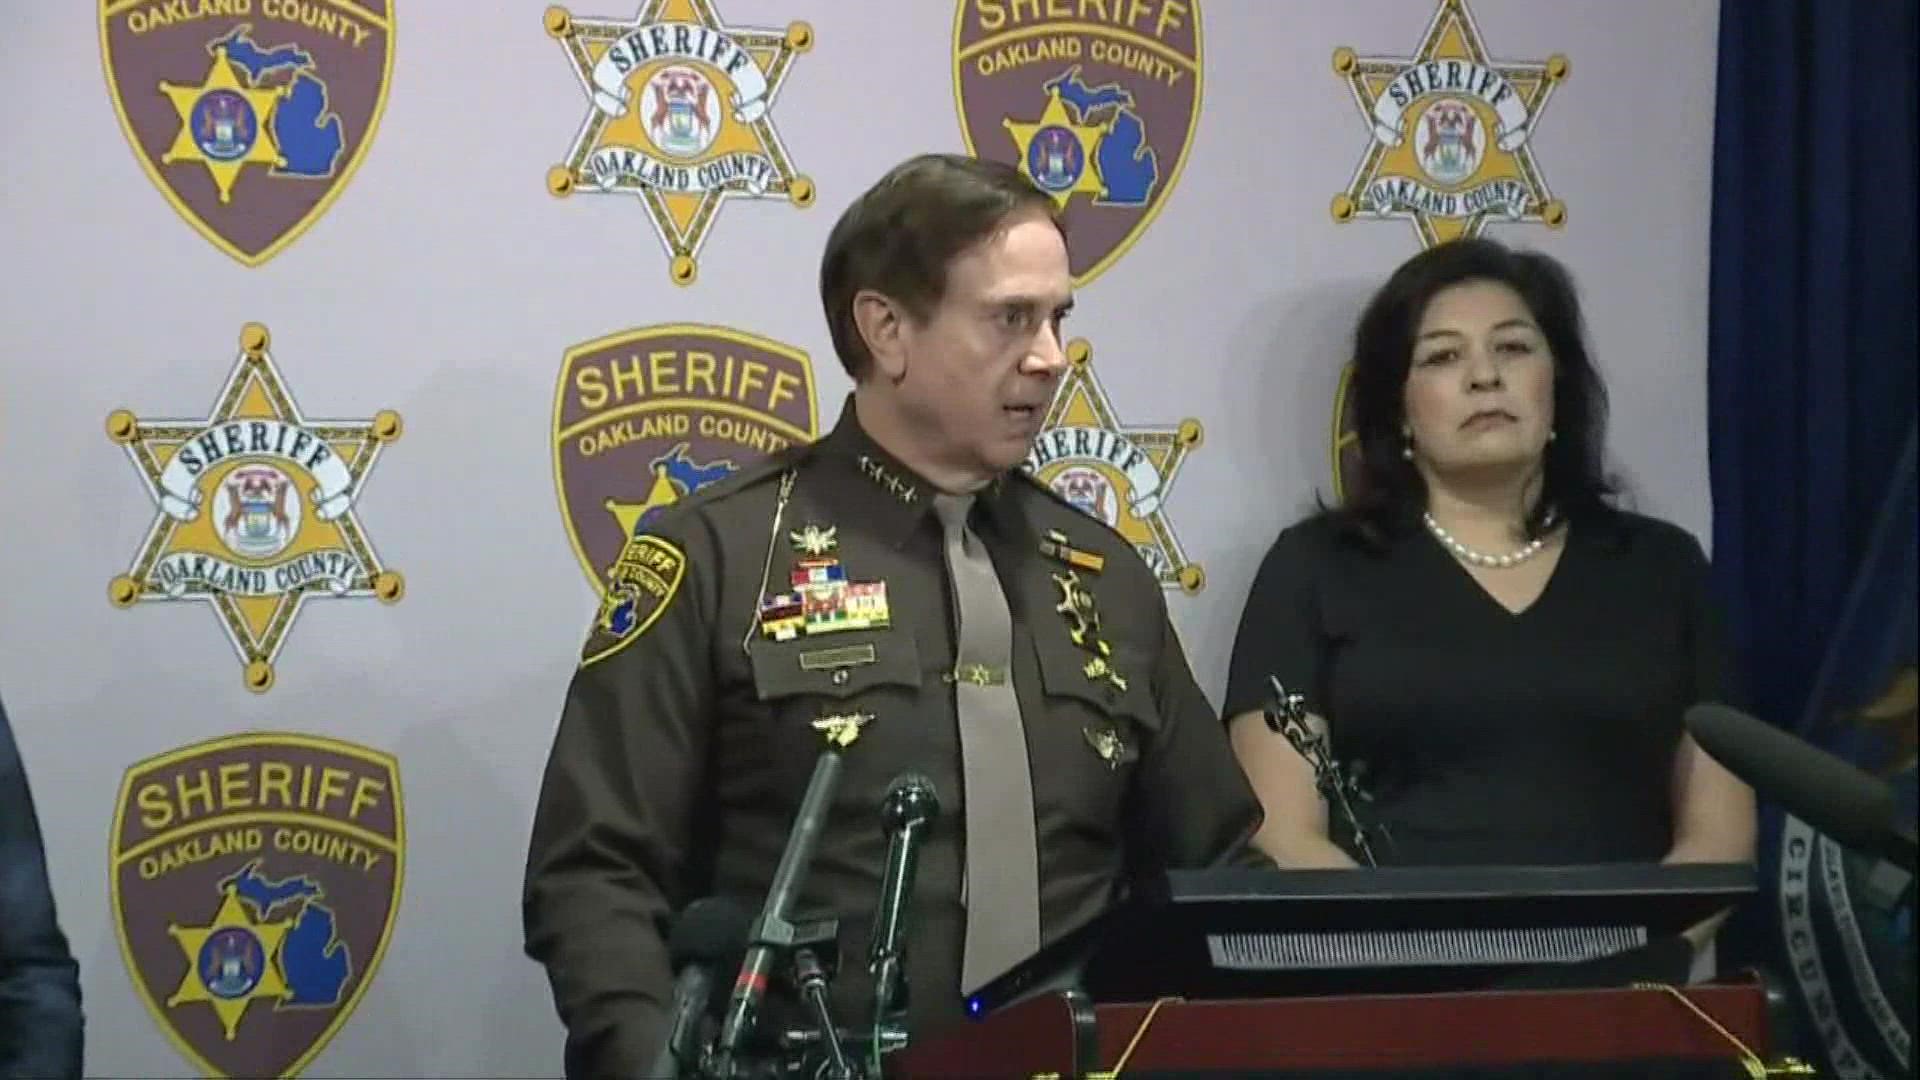 Sheriff Michael Bouchard said any threats made against schools will be fully investigated.